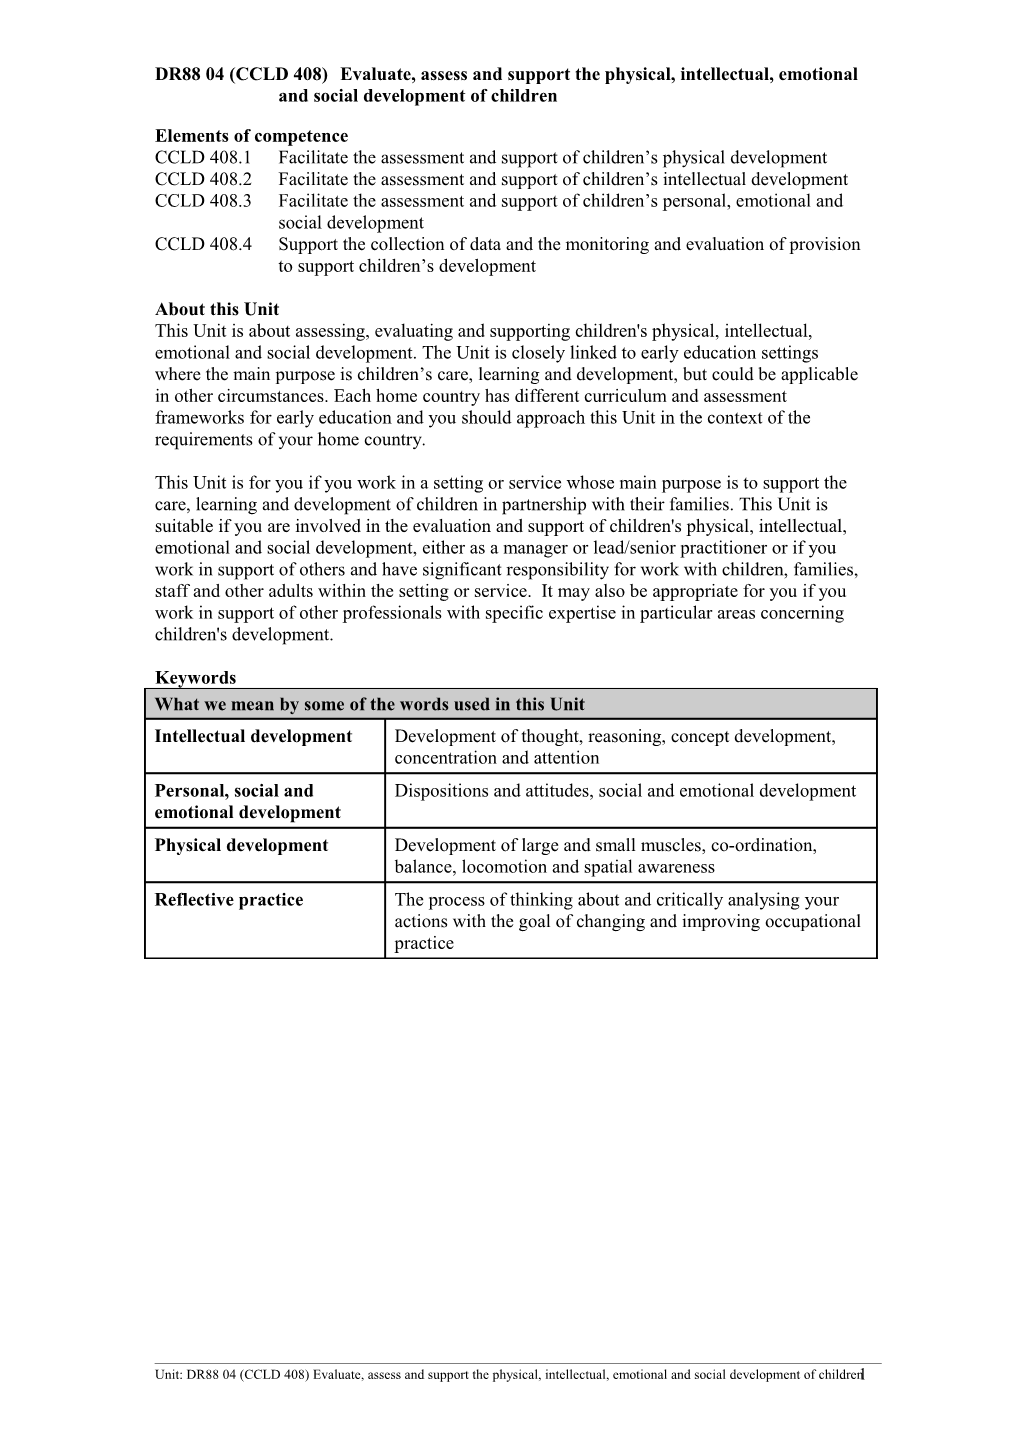 DR88 04 (CCLD 408)Evaluate, Assess and Support the Physical, Intellectual, Emotional And